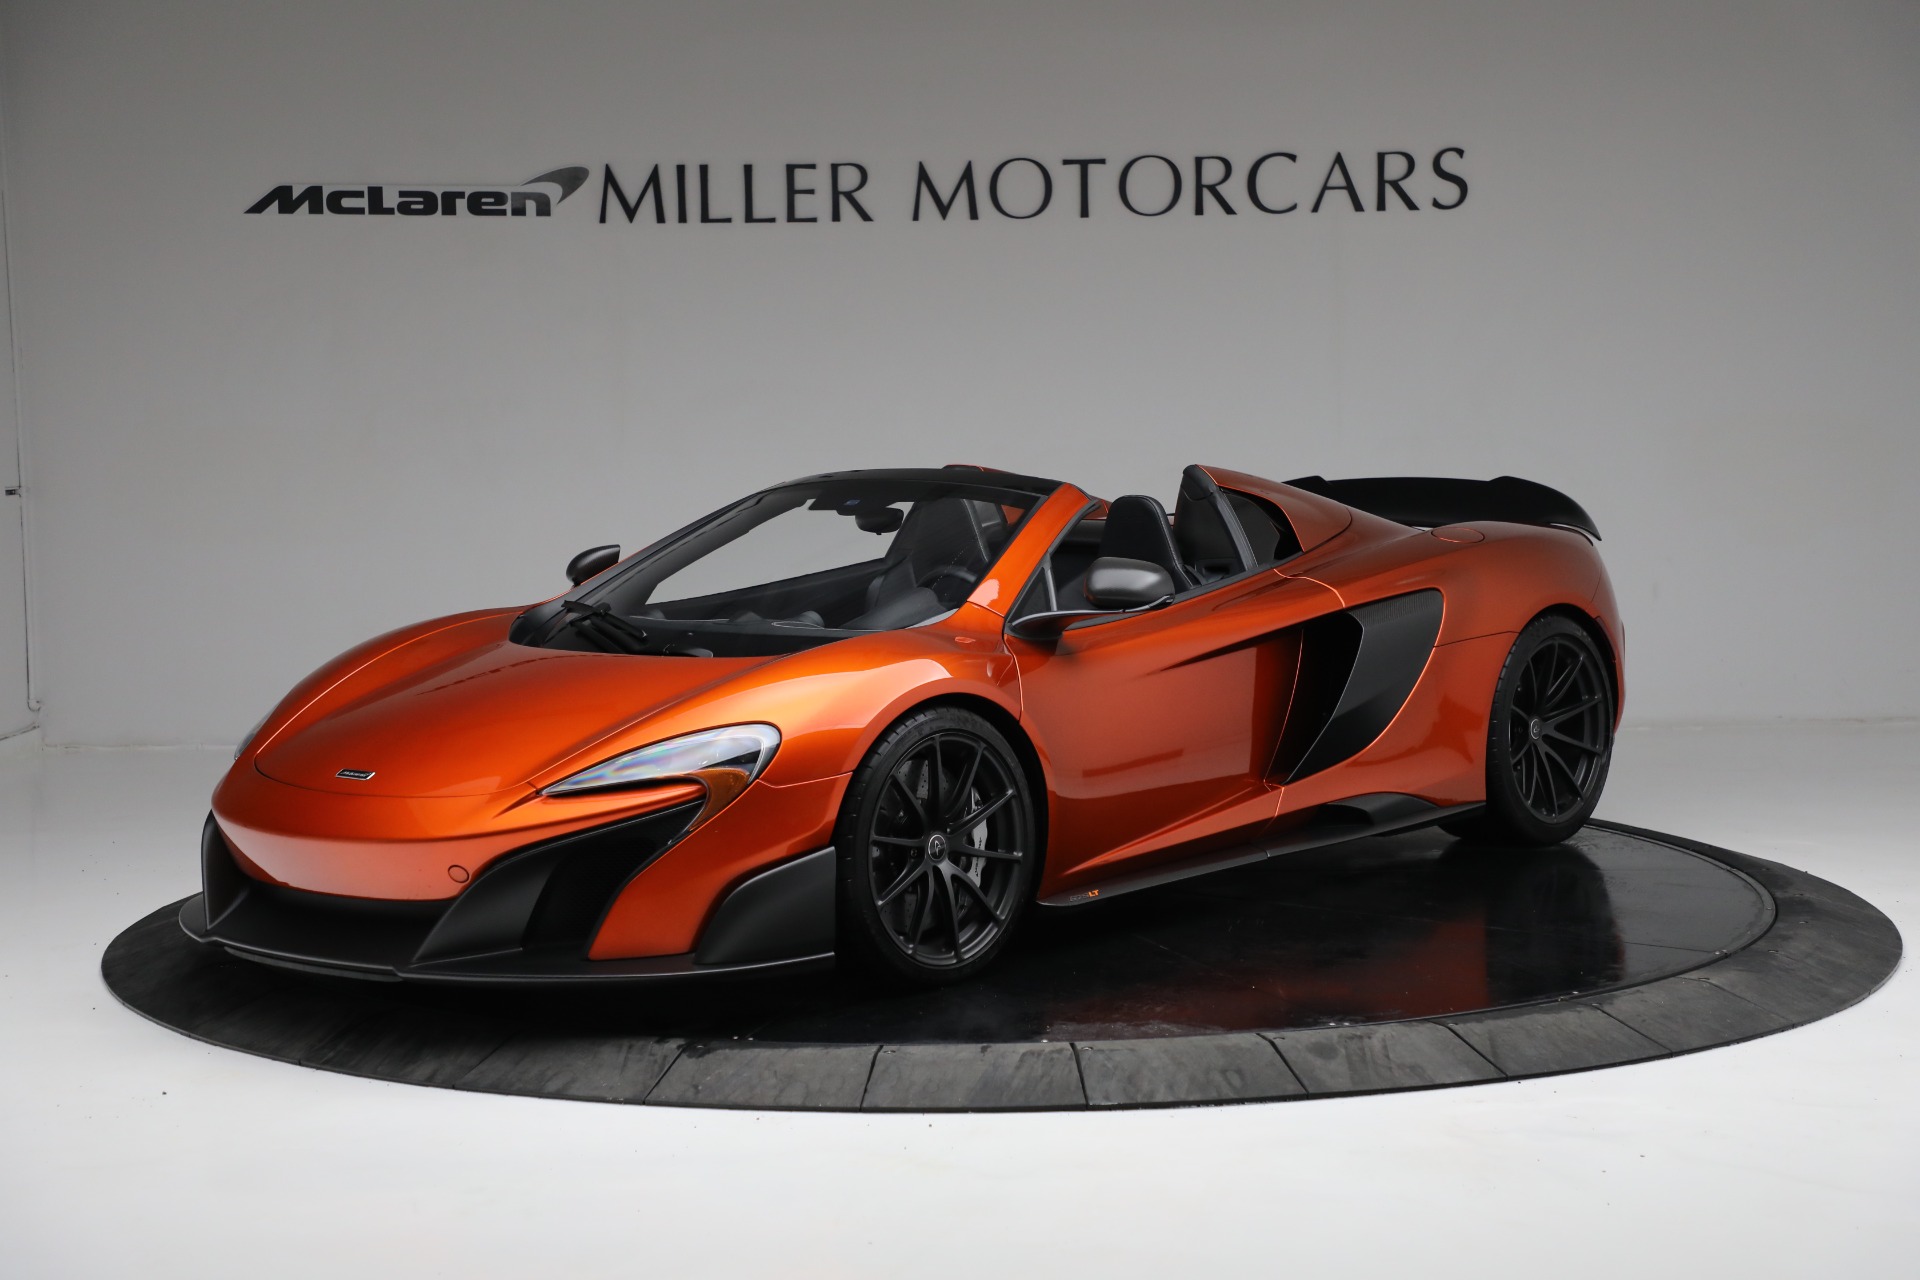 Used 2016 McLaren 675LT Spider for sale $335,900 at Bugatti of Greenwich in Greenwich CT 06830 1